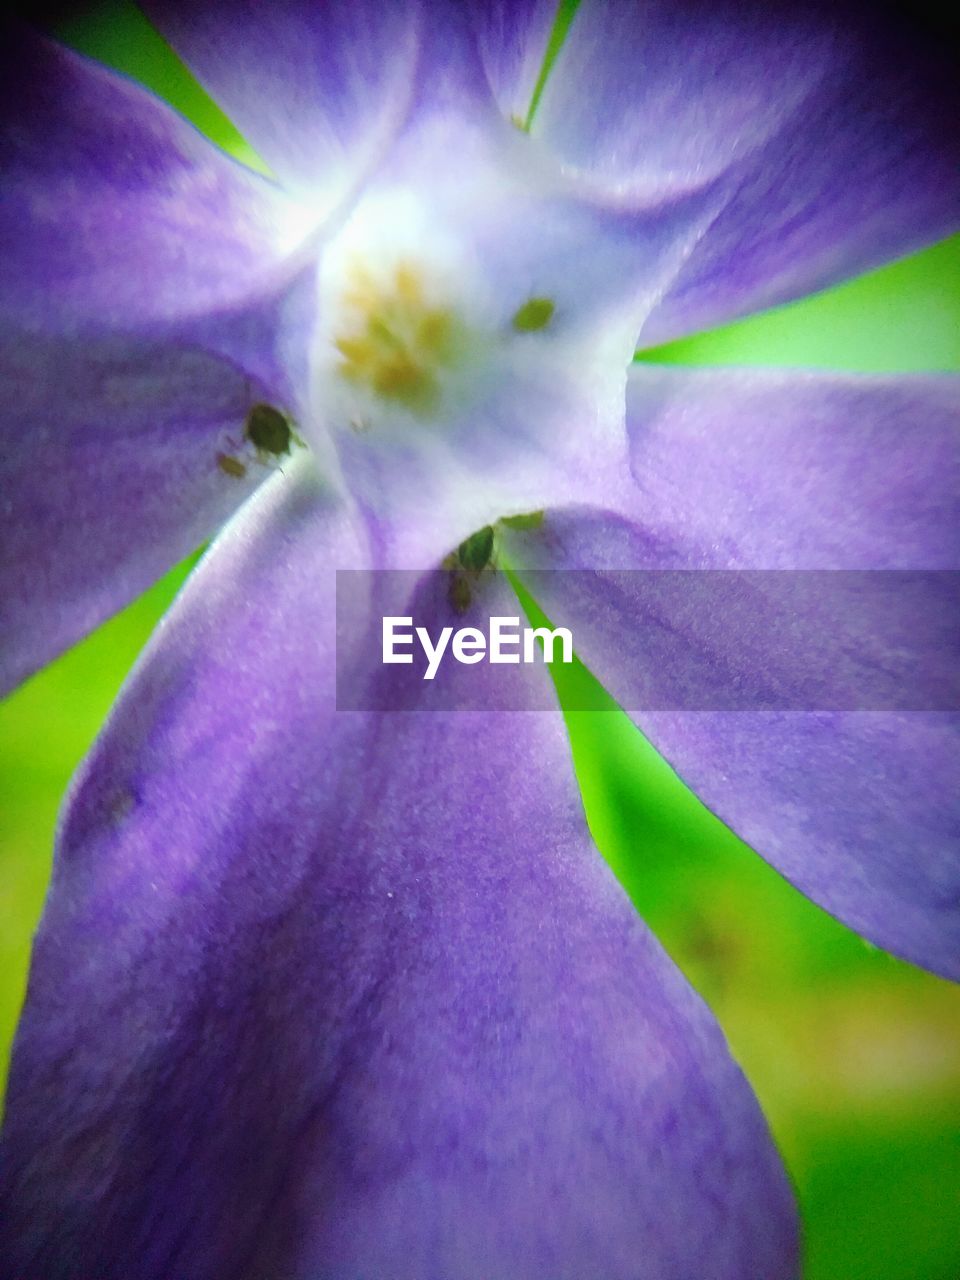 CLOSE-UP OF FRESH PURPLE FLOWER BLOOMING OUTDOORS